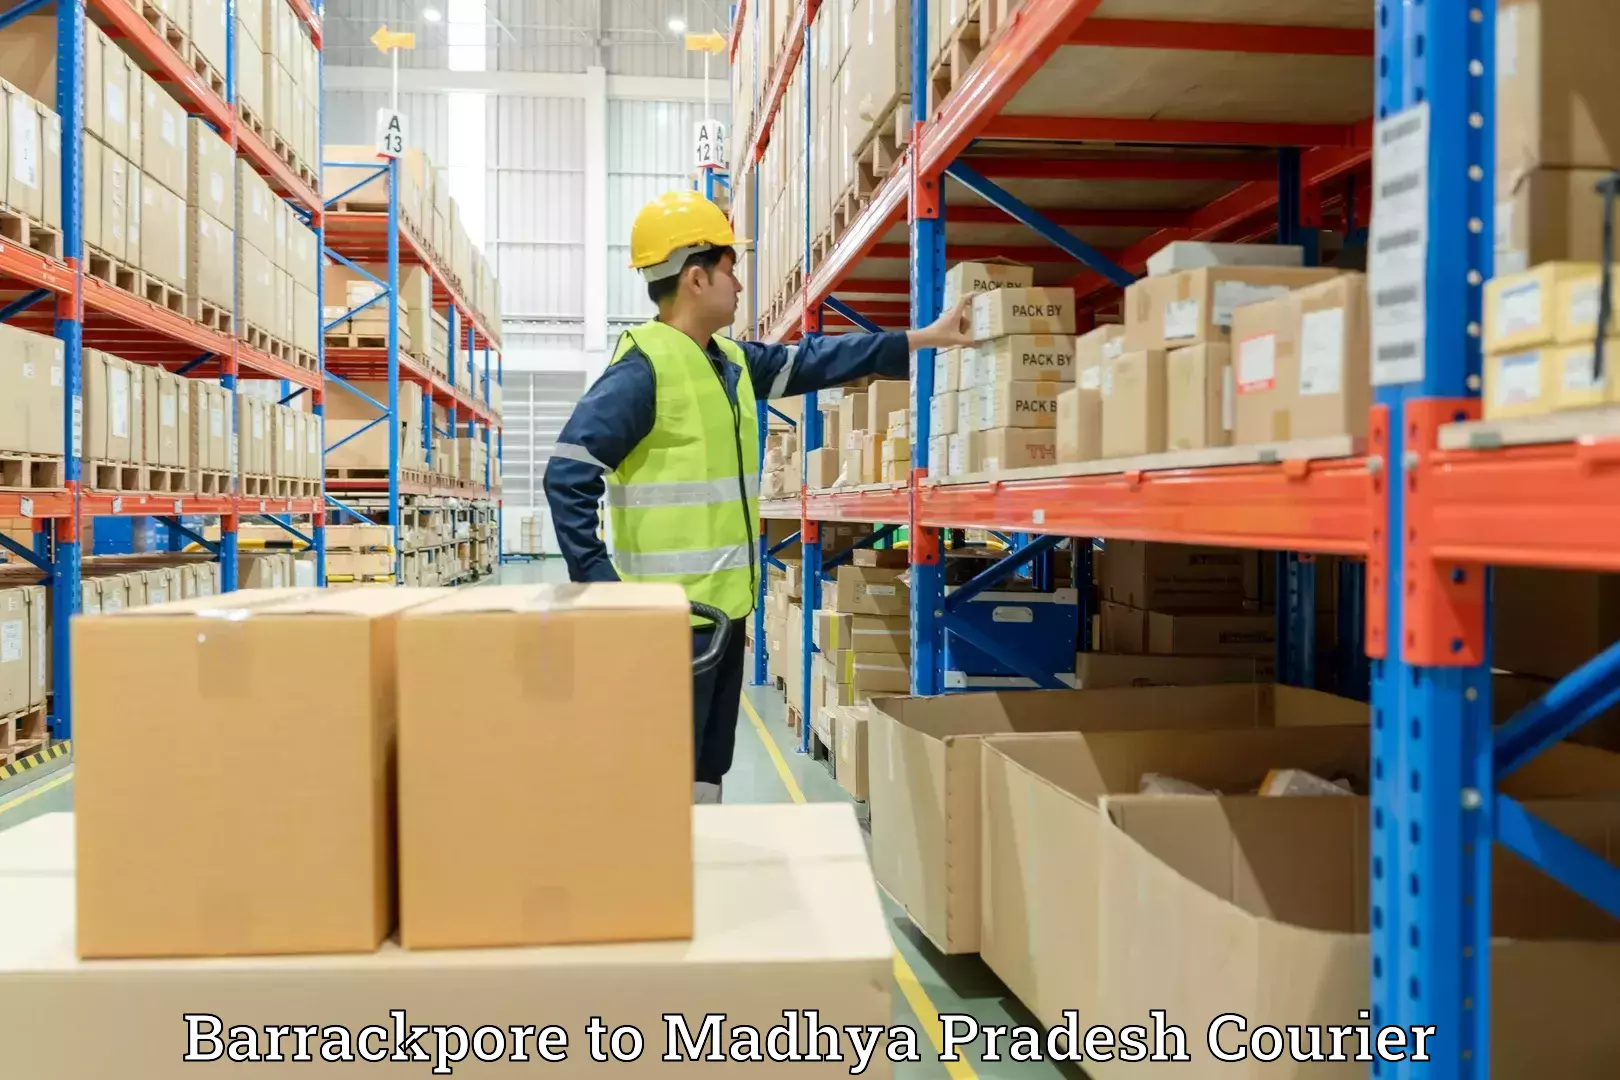 Moving and packing experts Barrackpore to Madhya Pradesh